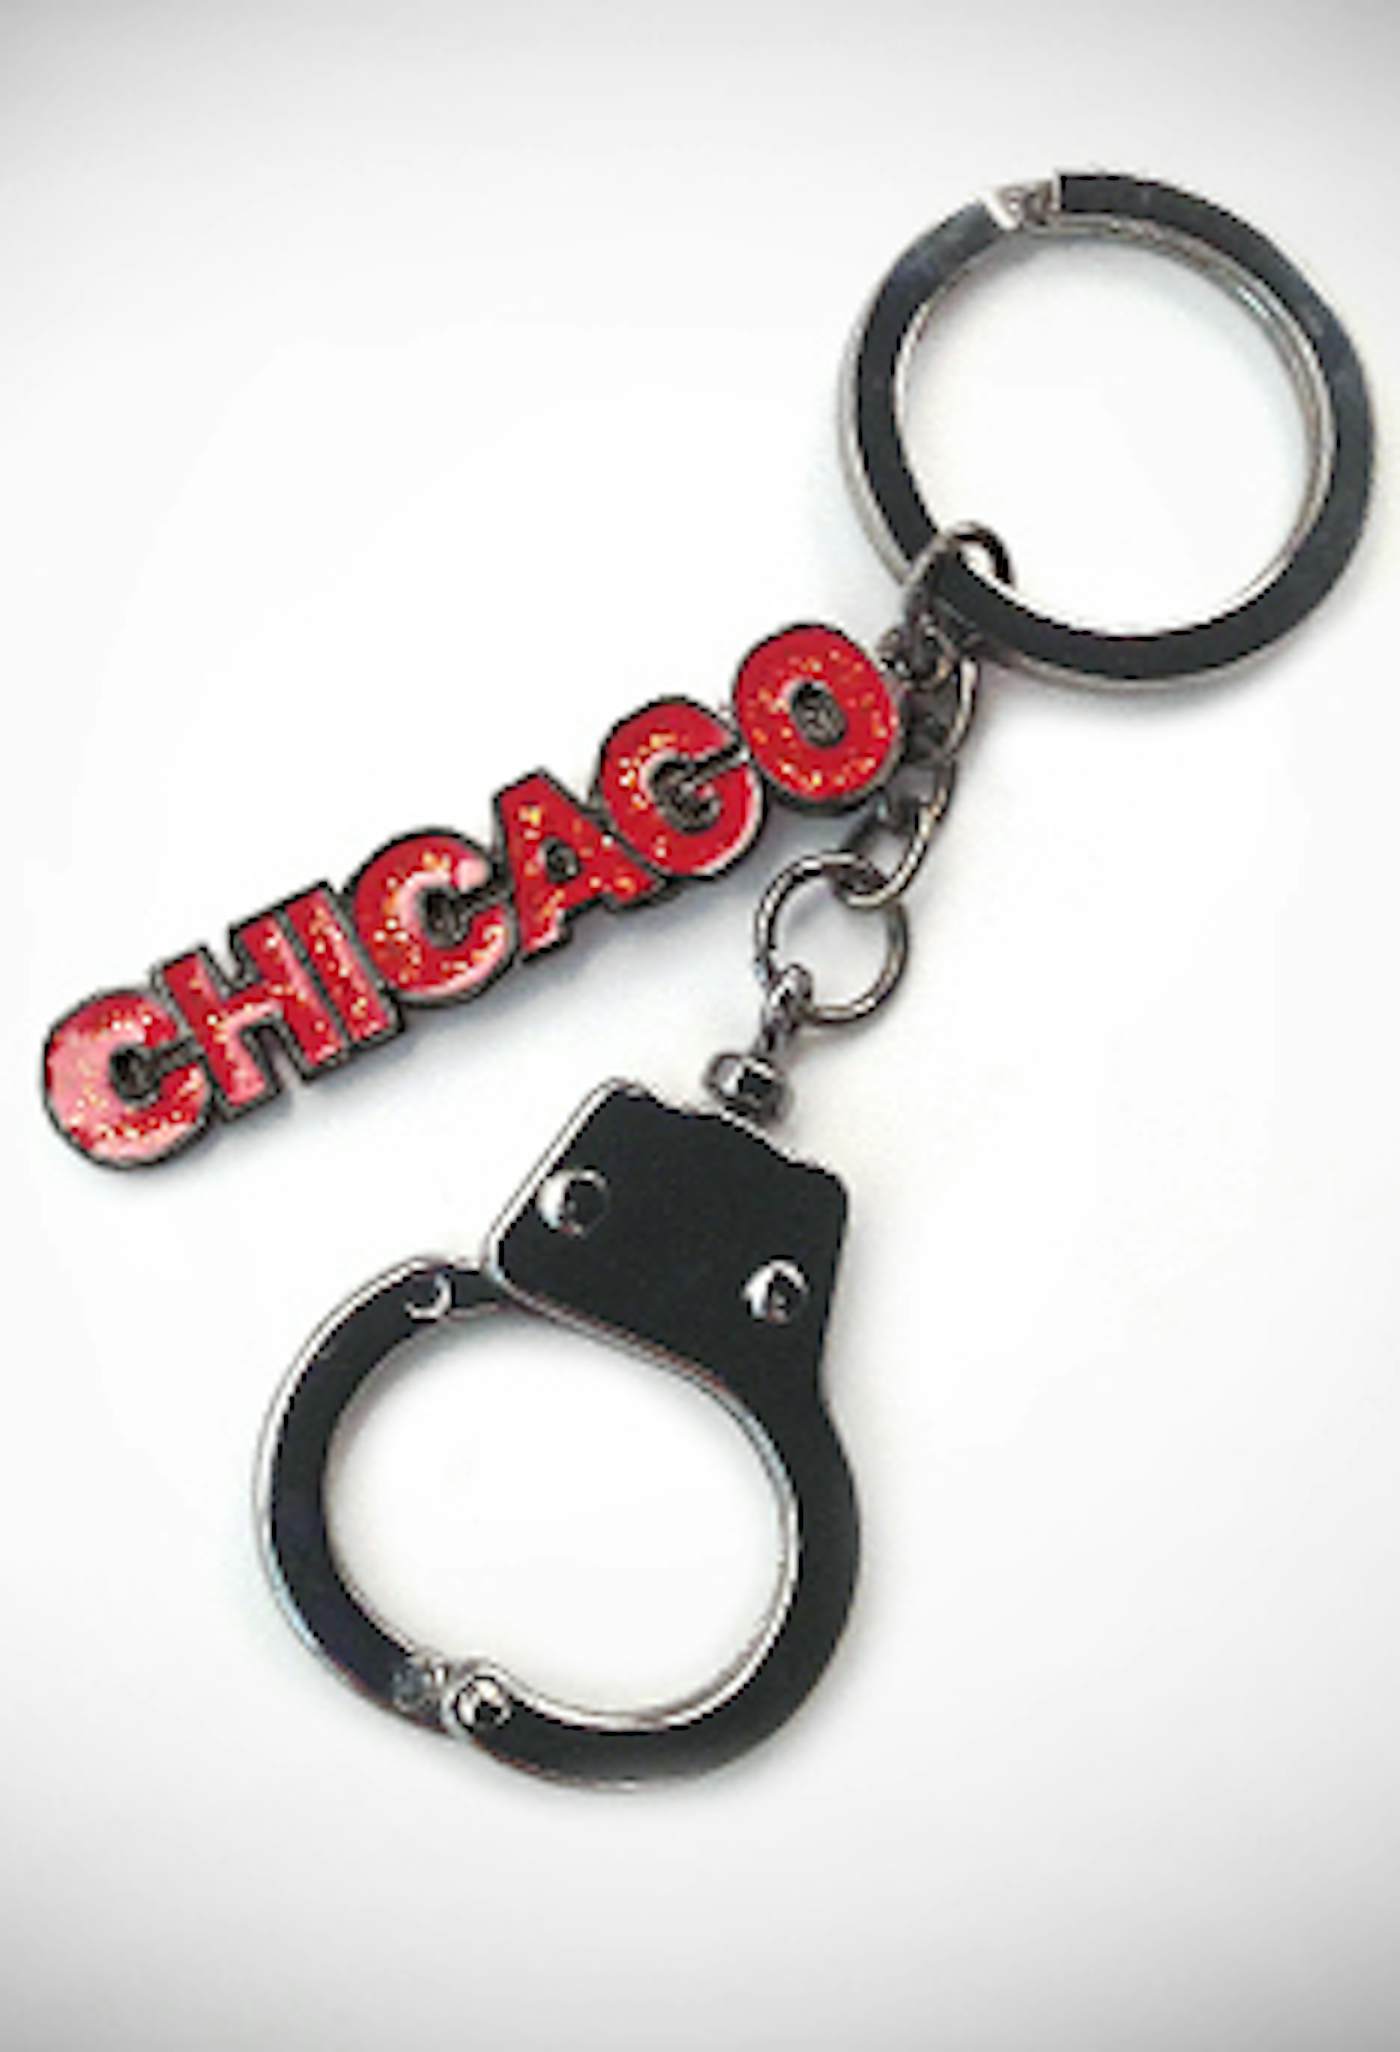 Chicago The Musical